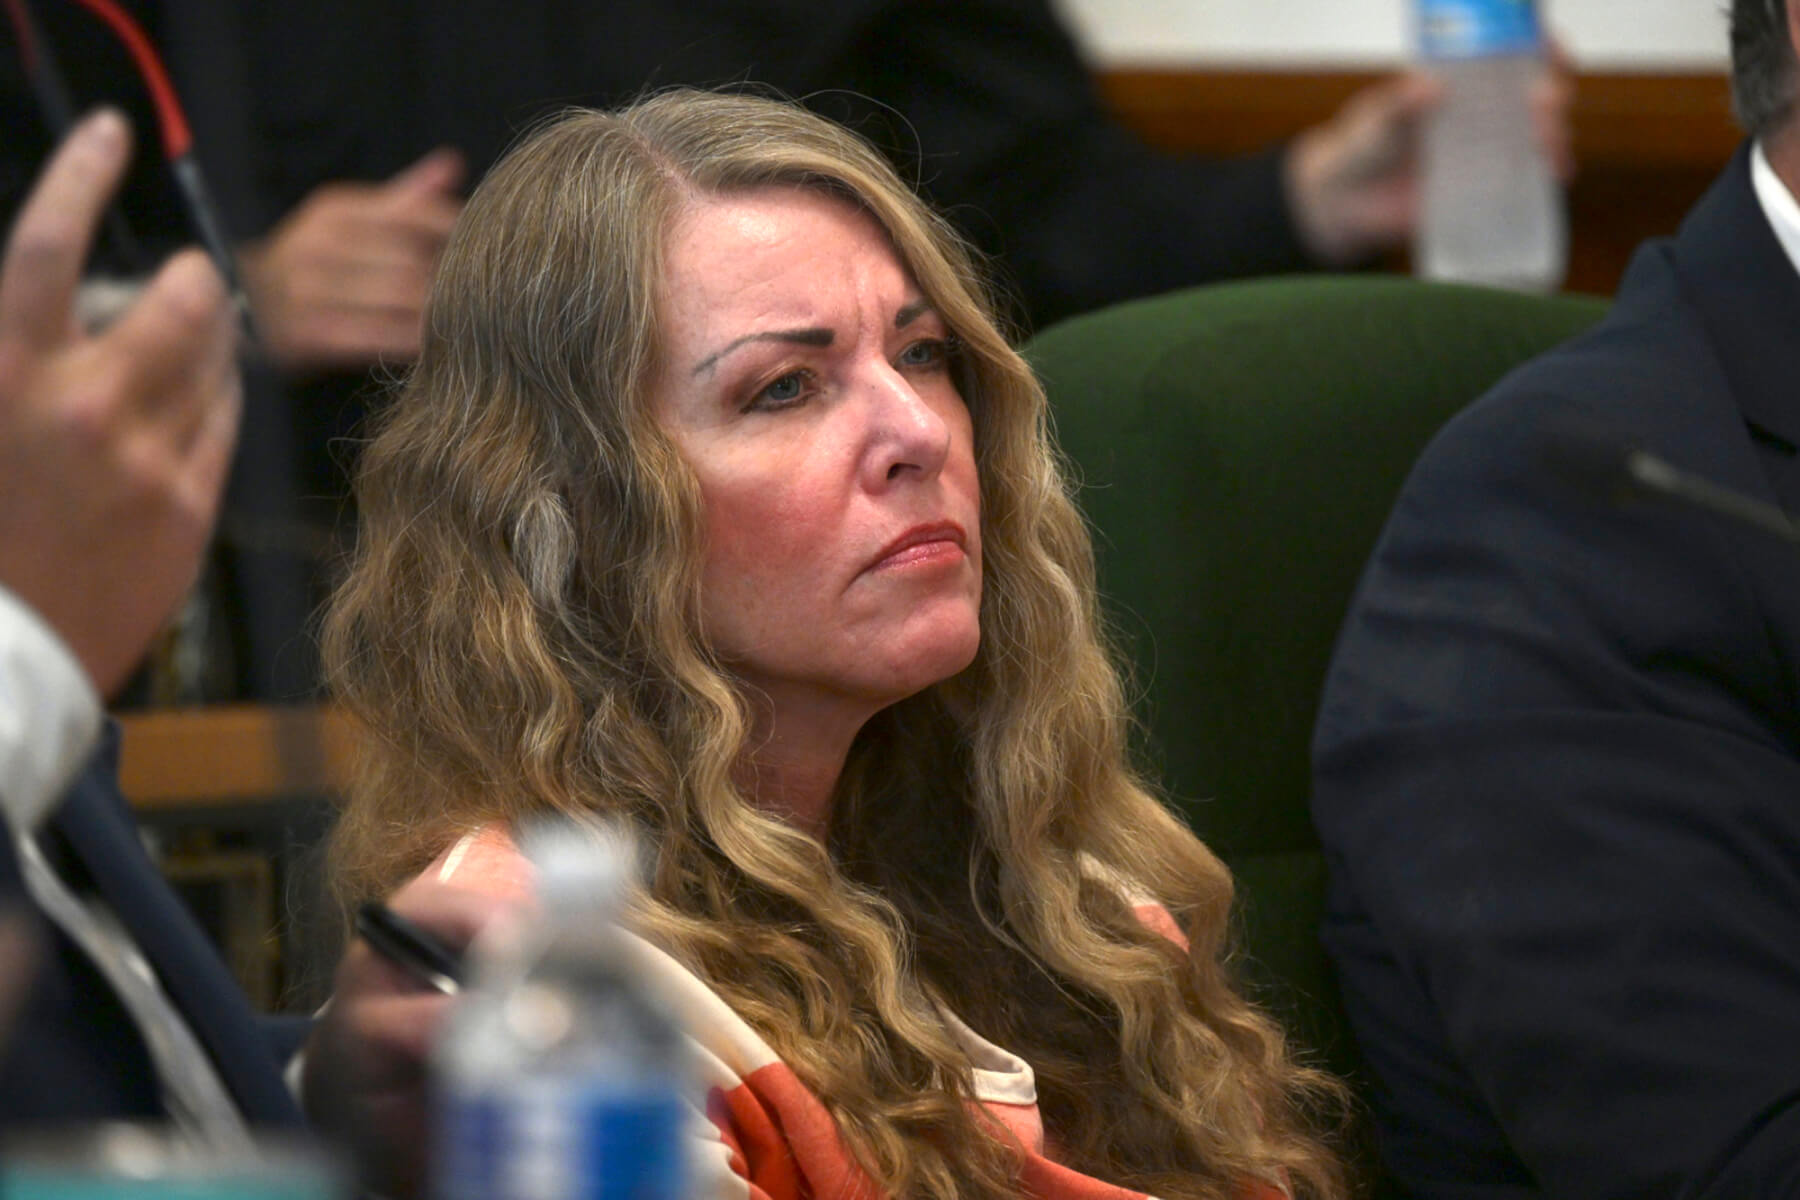 Lori Vallow Daybell sits during her sentencing hearing.